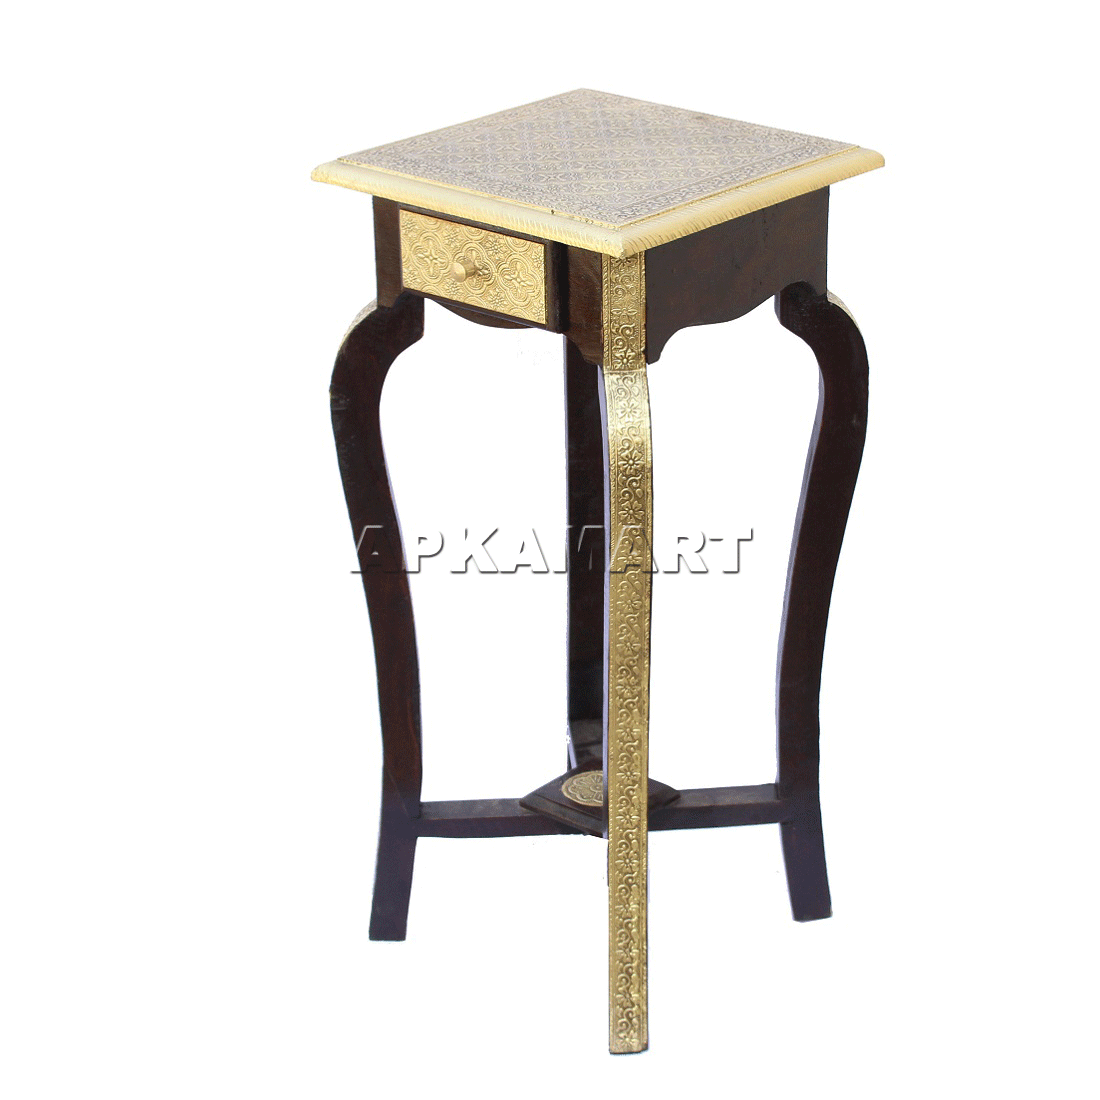 Brass Embellished Designer Coffee Table |Side Table for Interiors Décor - with Drawer - ApkaMart